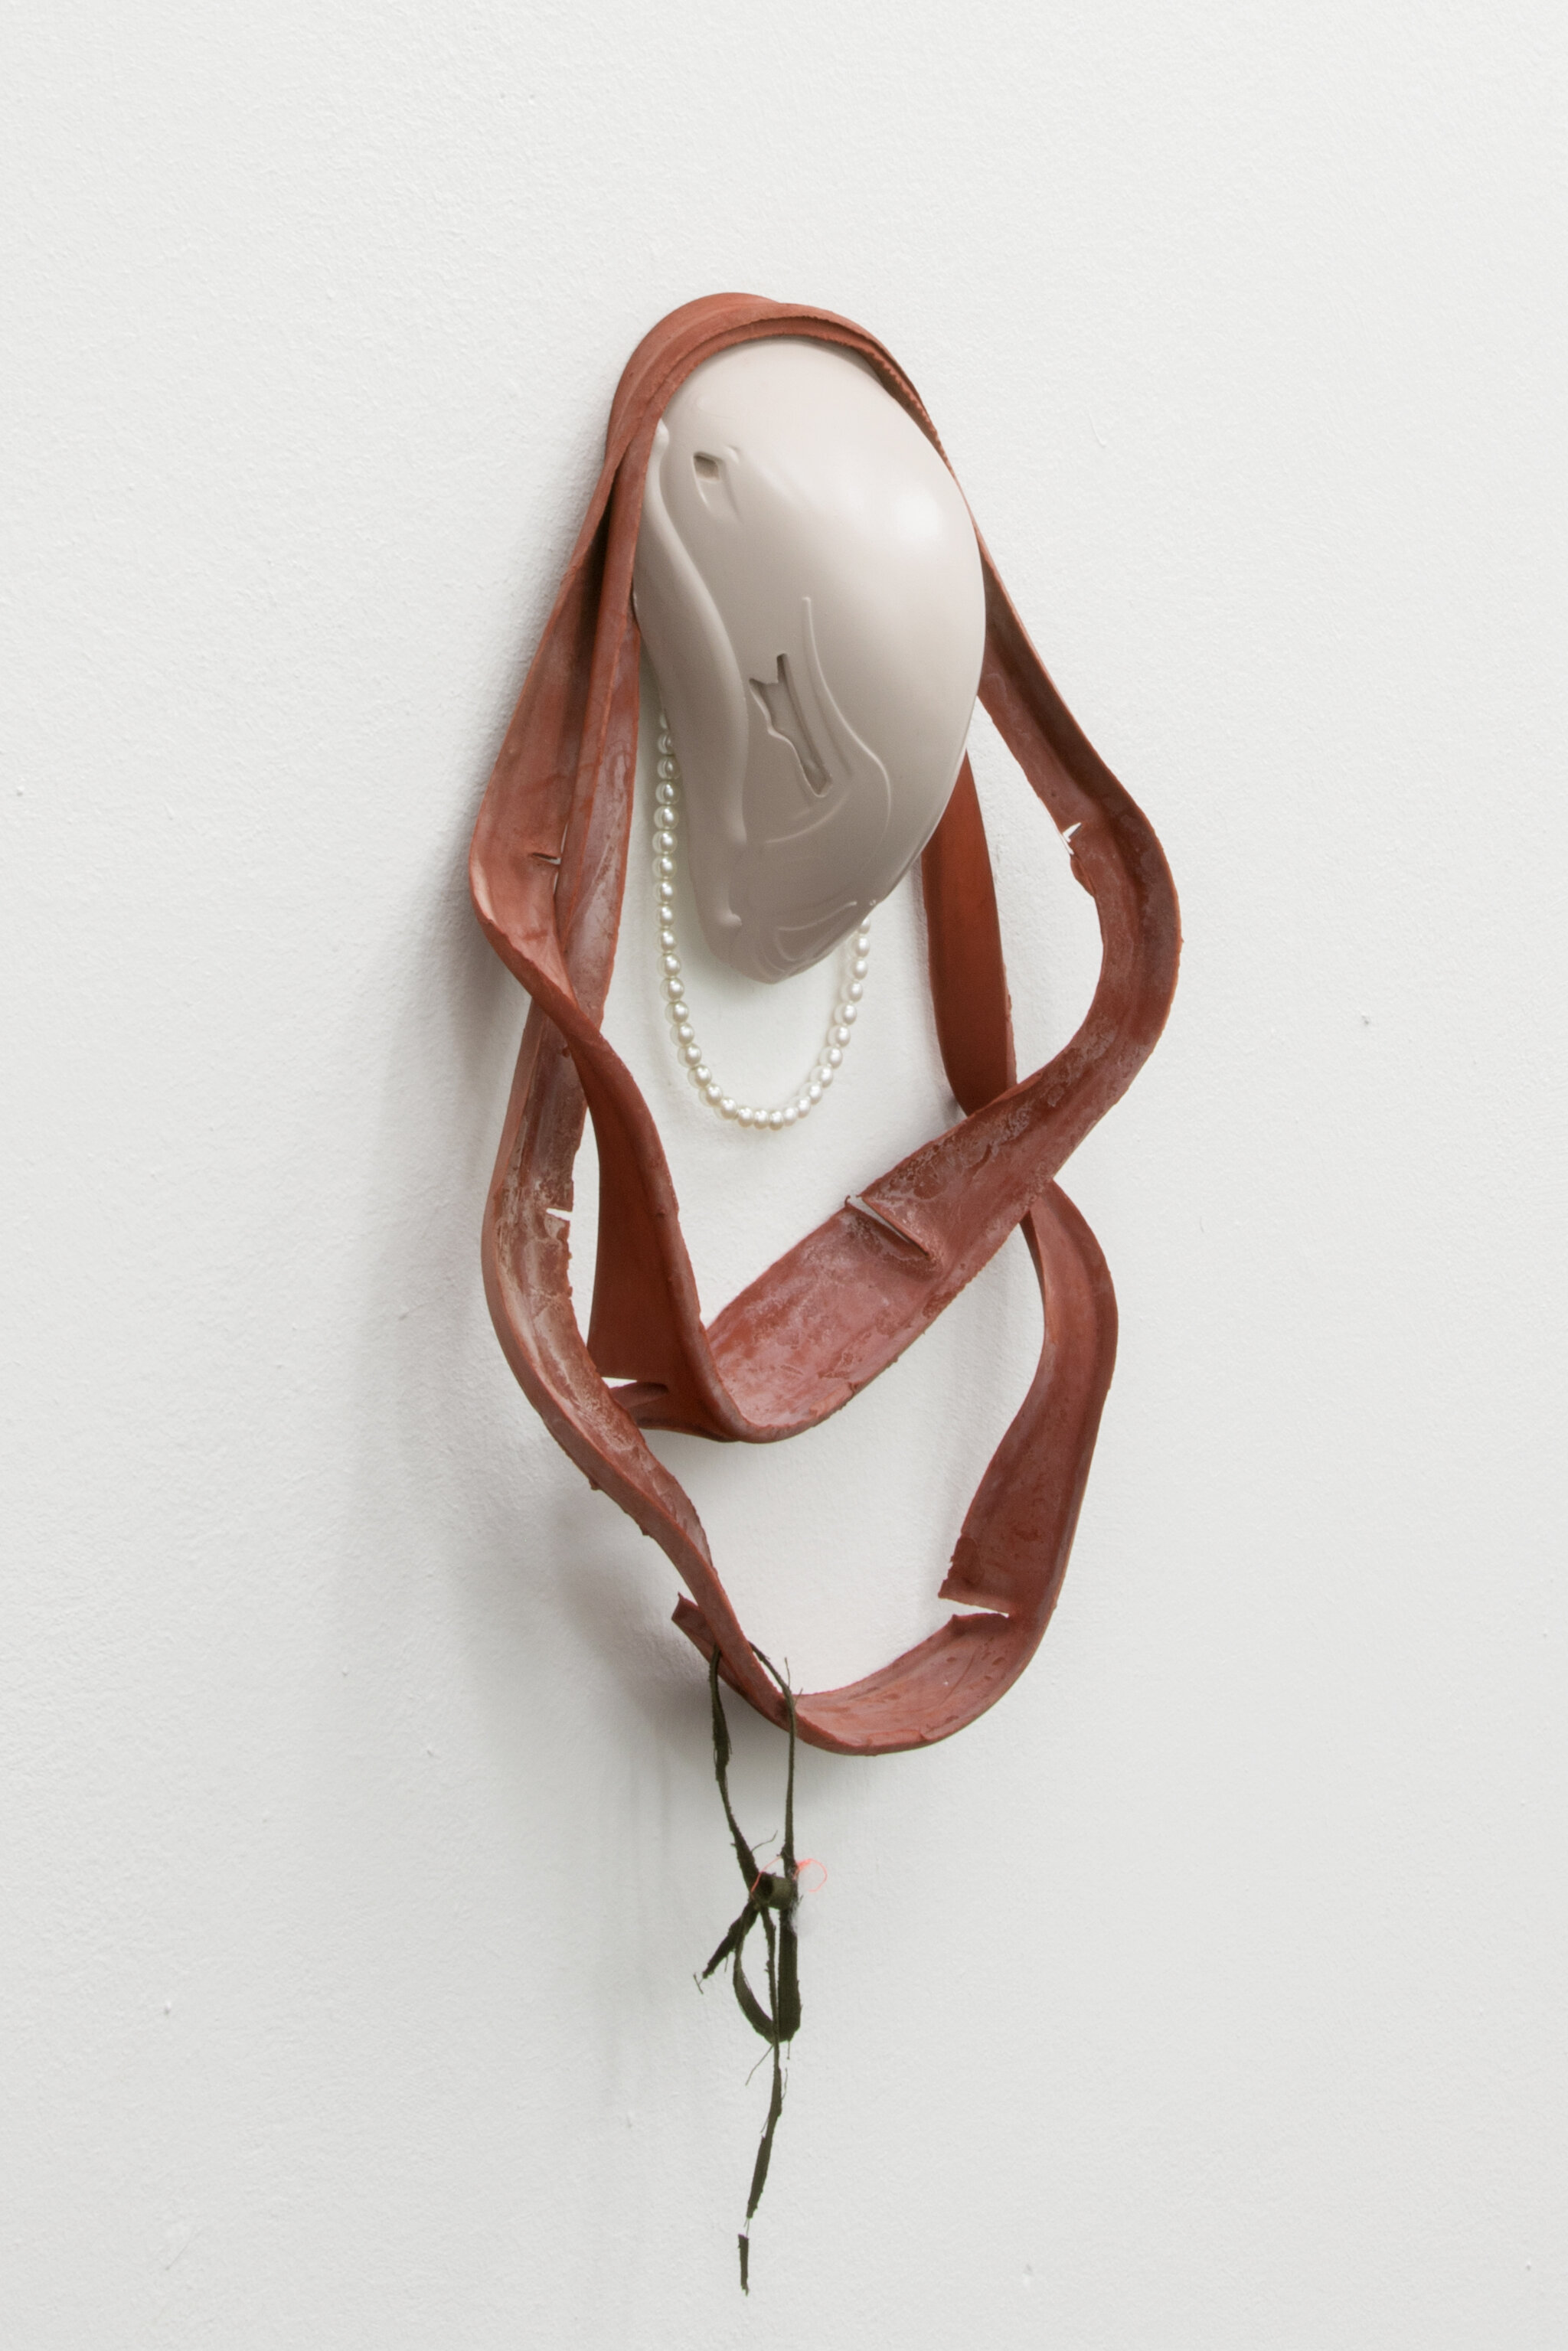 Daphne Ahlers, Clamshell, 2019